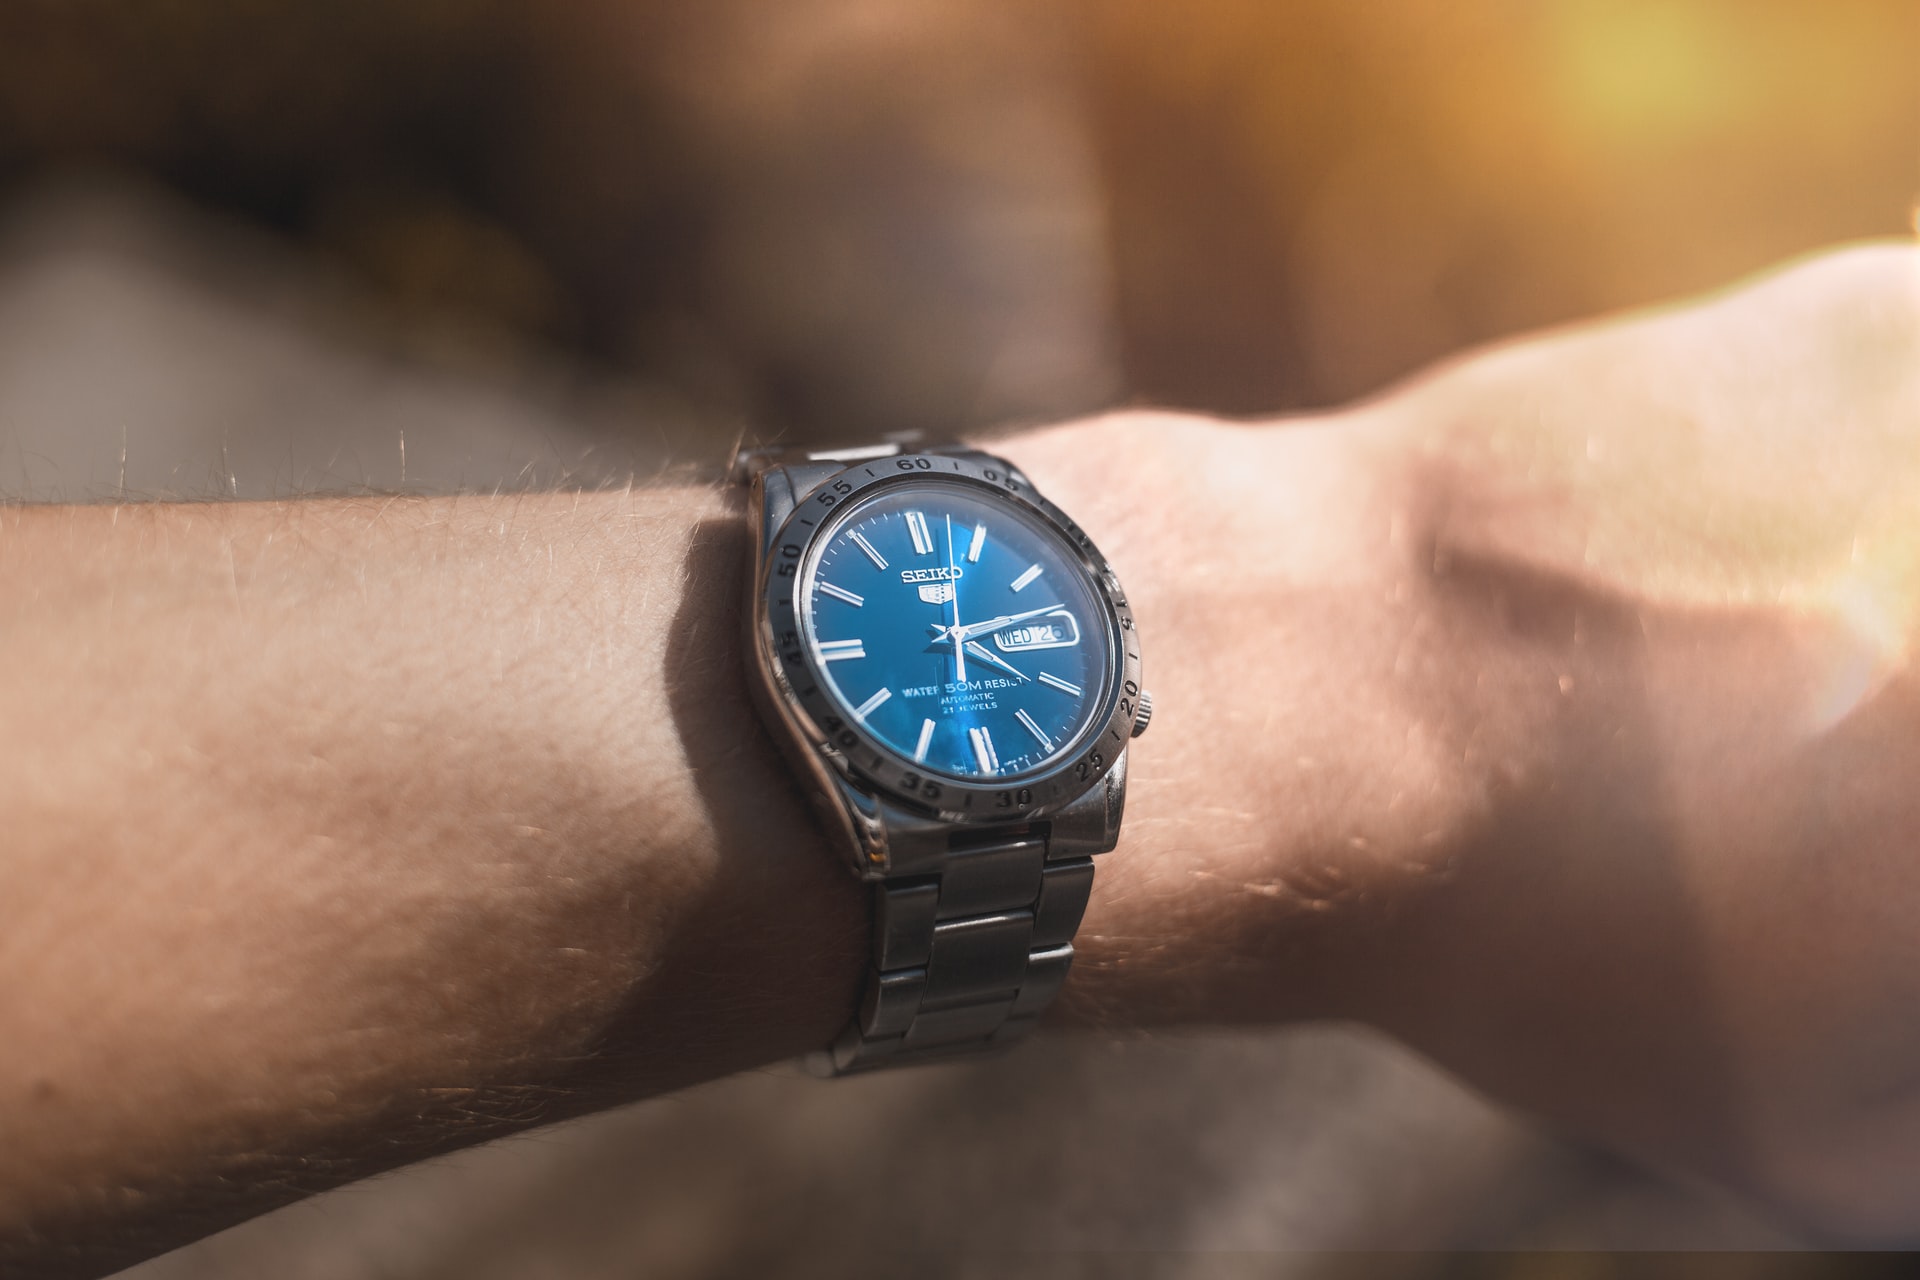 Top 10 Blue Watches